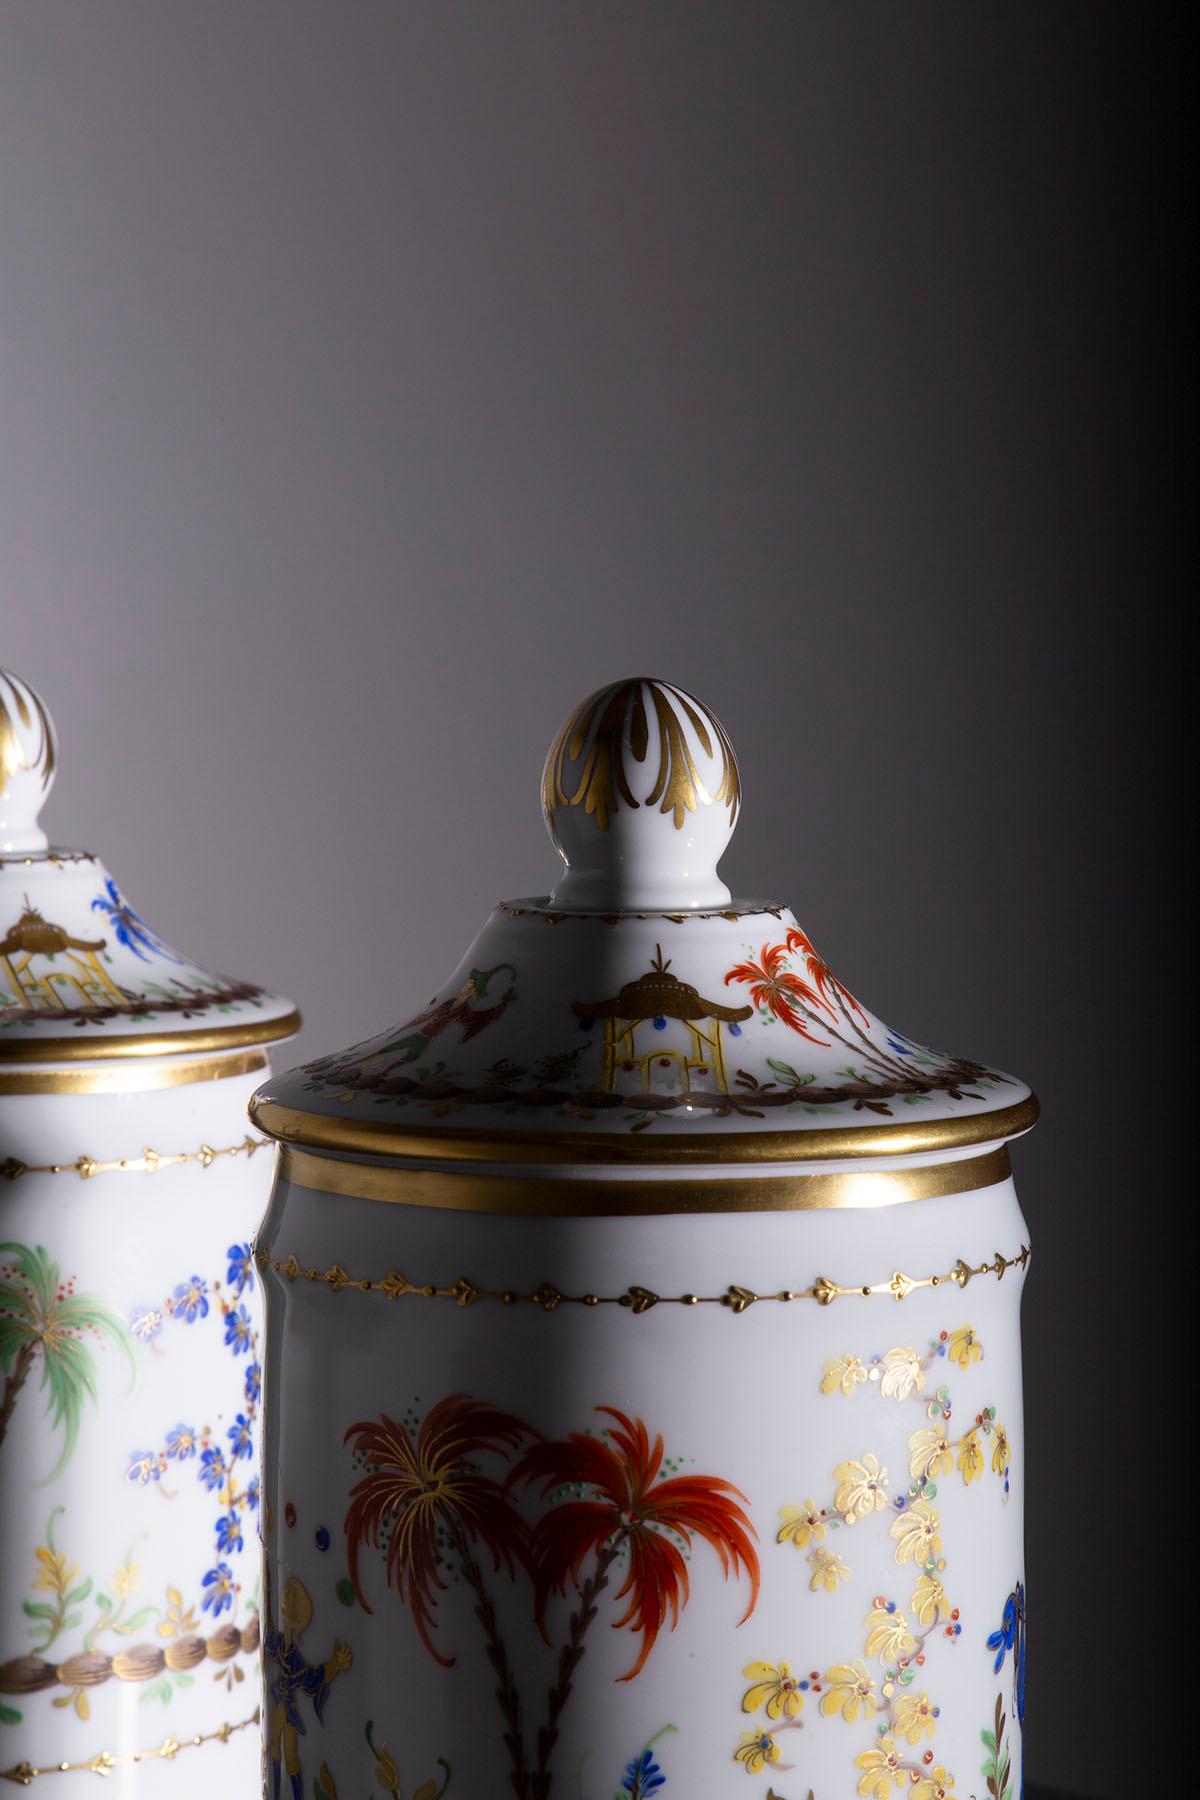 Before us unfolds a pair of pharmacy jars in exquisite porcelain, bearing the signature of Le Tallec-an authentic masterpiece that transcends mere artwork. These jars encapsulate a captivating history and timeless beauty.

The dating of these jars